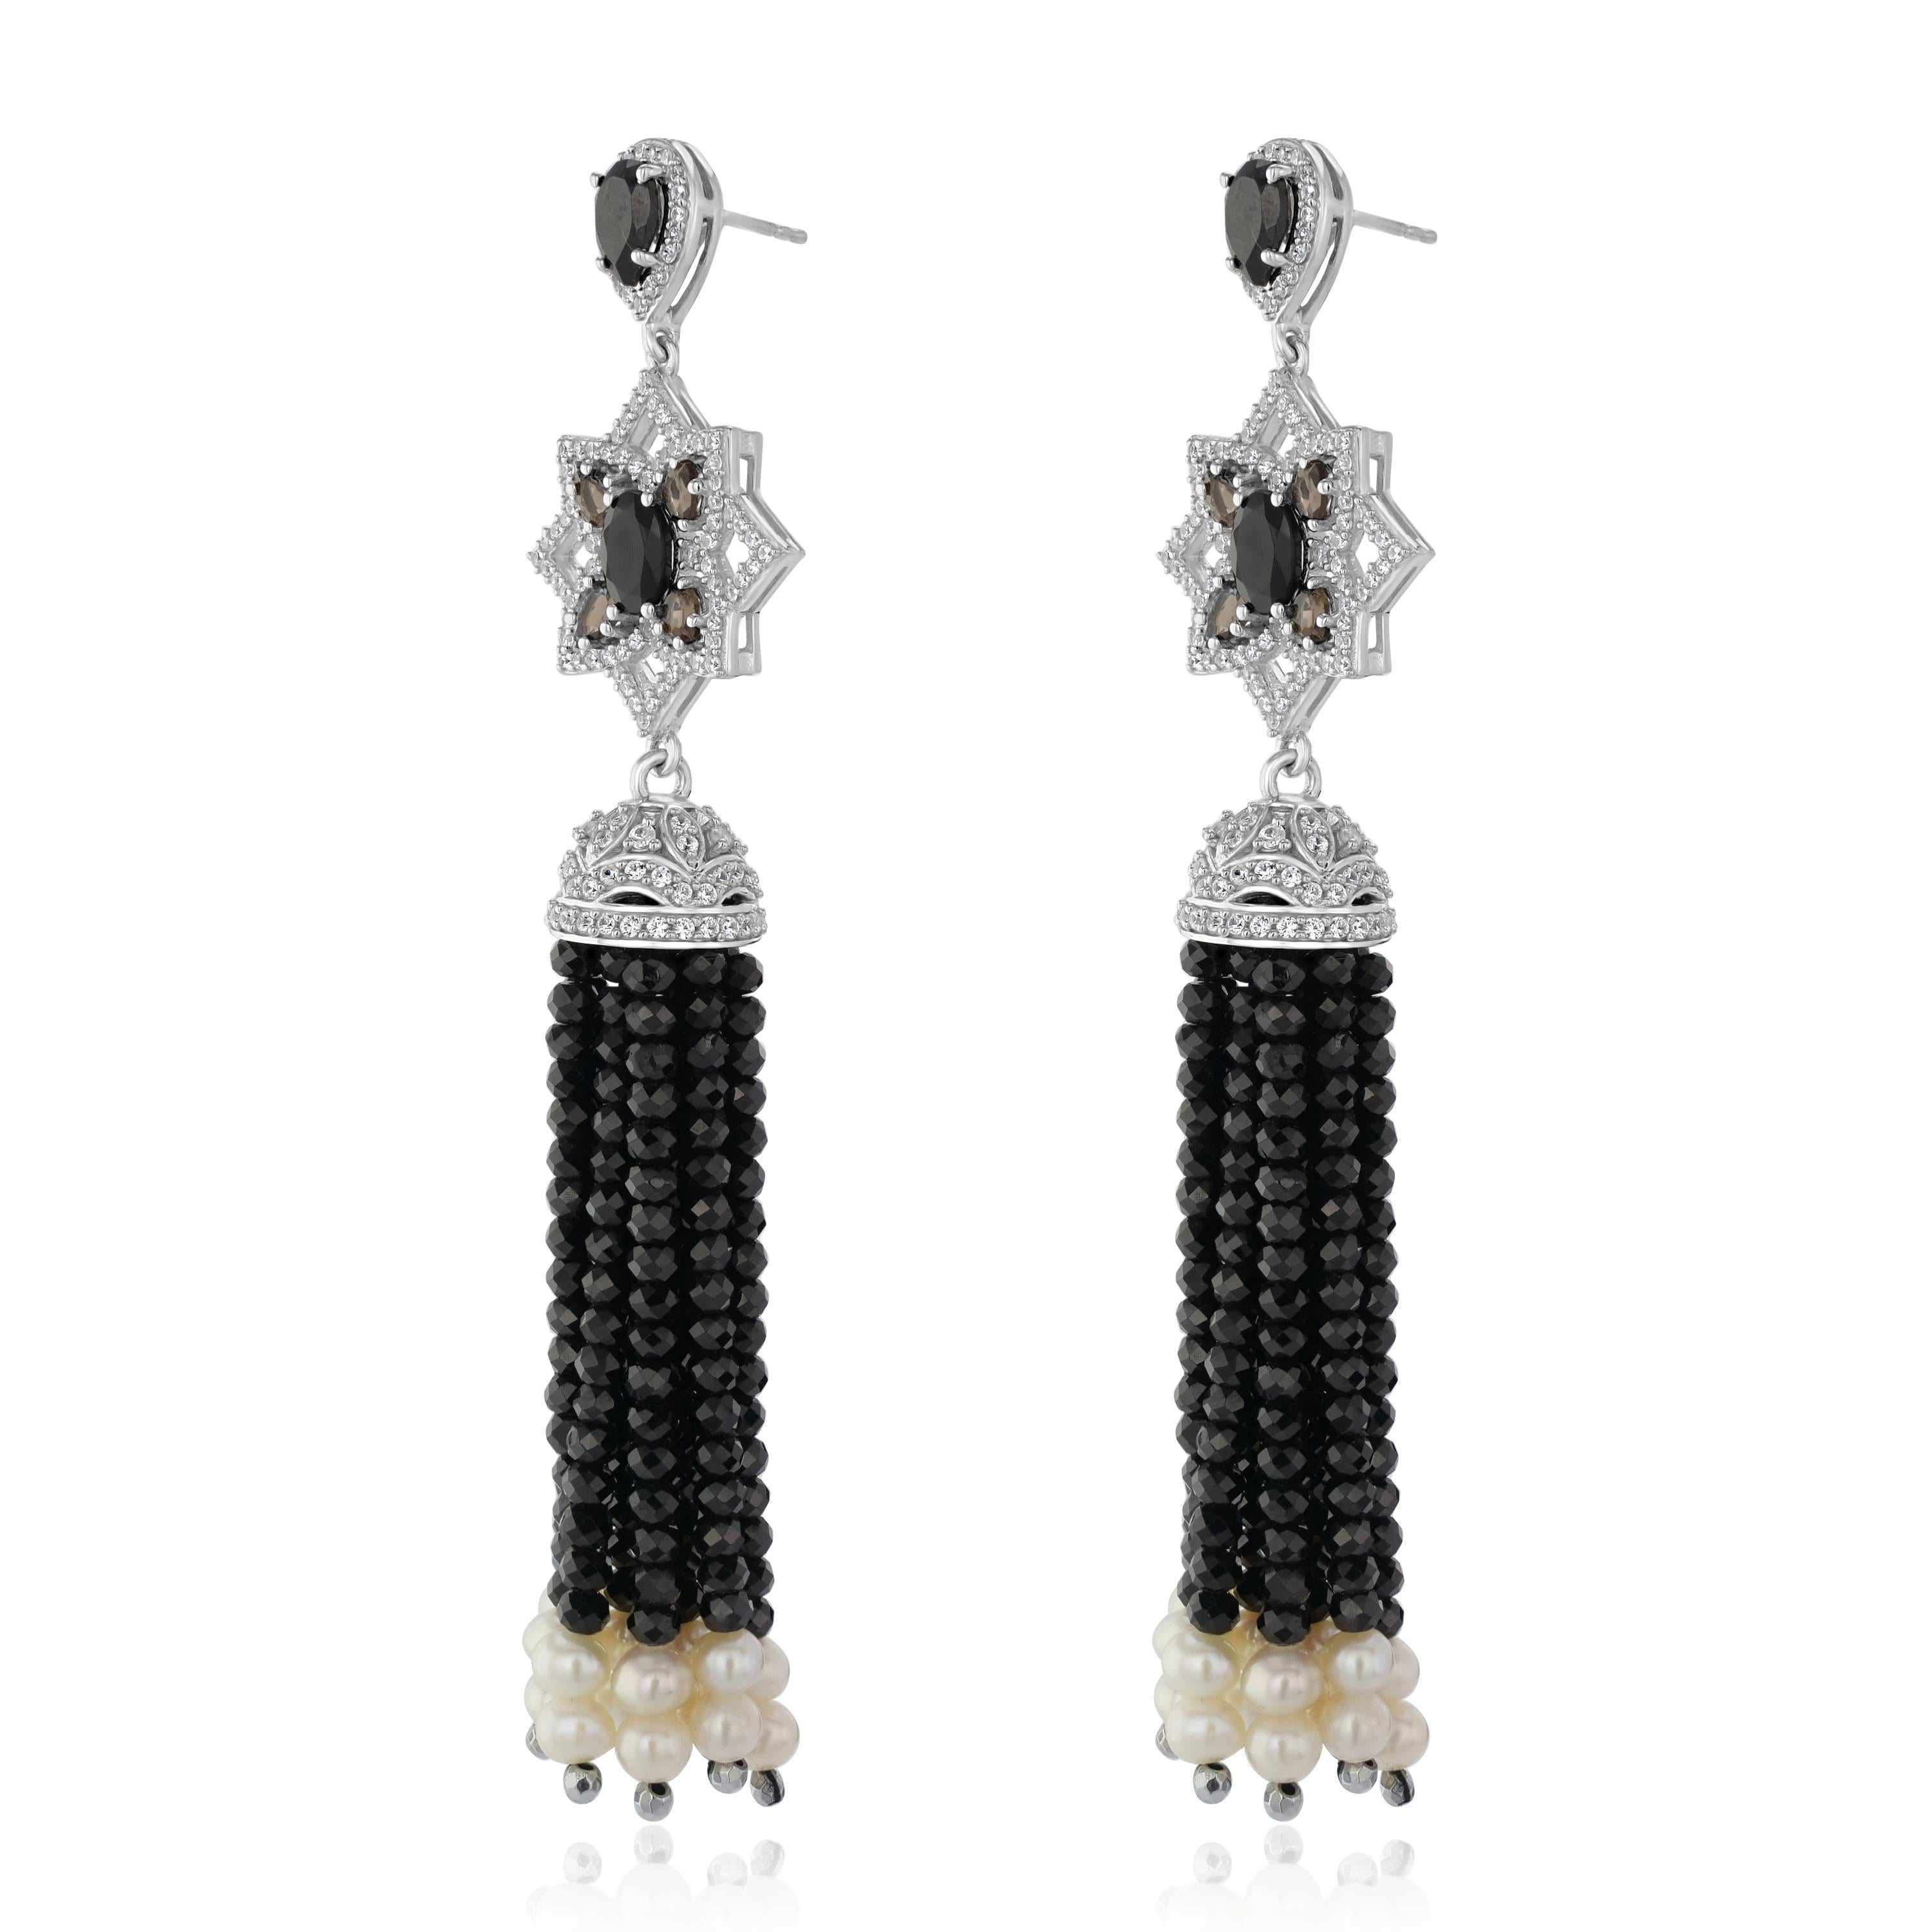 Black Spinel, Smoky Quartz, White Natural Zircon And Freshwater Pearl Tassel Earring In Sterling Silver.A magnificent fusion of black spinel beads and freshwater pearls accompanied by white natural zircon and smoky quartz make these women's tassel